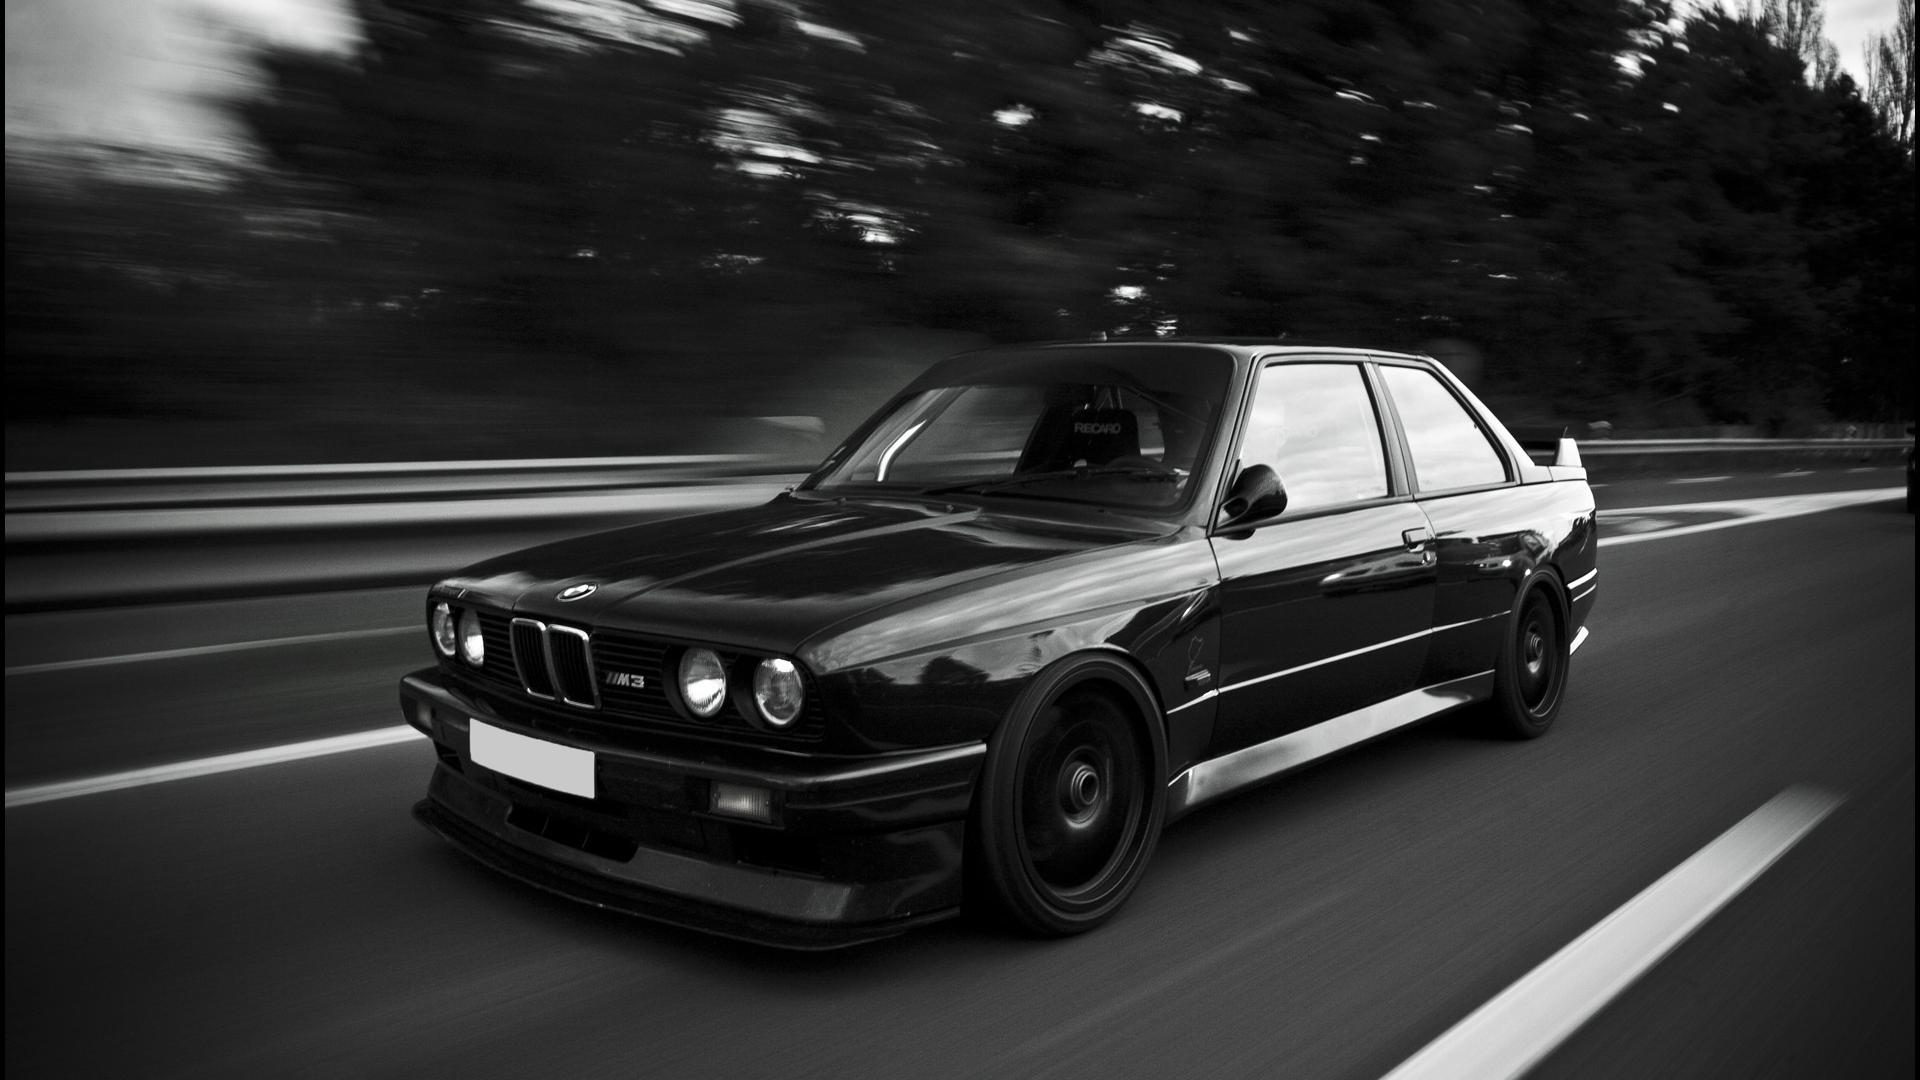 Free download Bmw e30 m3 black and white wallpaper 72478 [1920x1080] for your Desktop, Mobile & Tablet. Explore E30 M3 Wallpaper. Bmw E46 Wallpaper, Bmw E30 Wallpaper, Bmw E36 Wallpaper